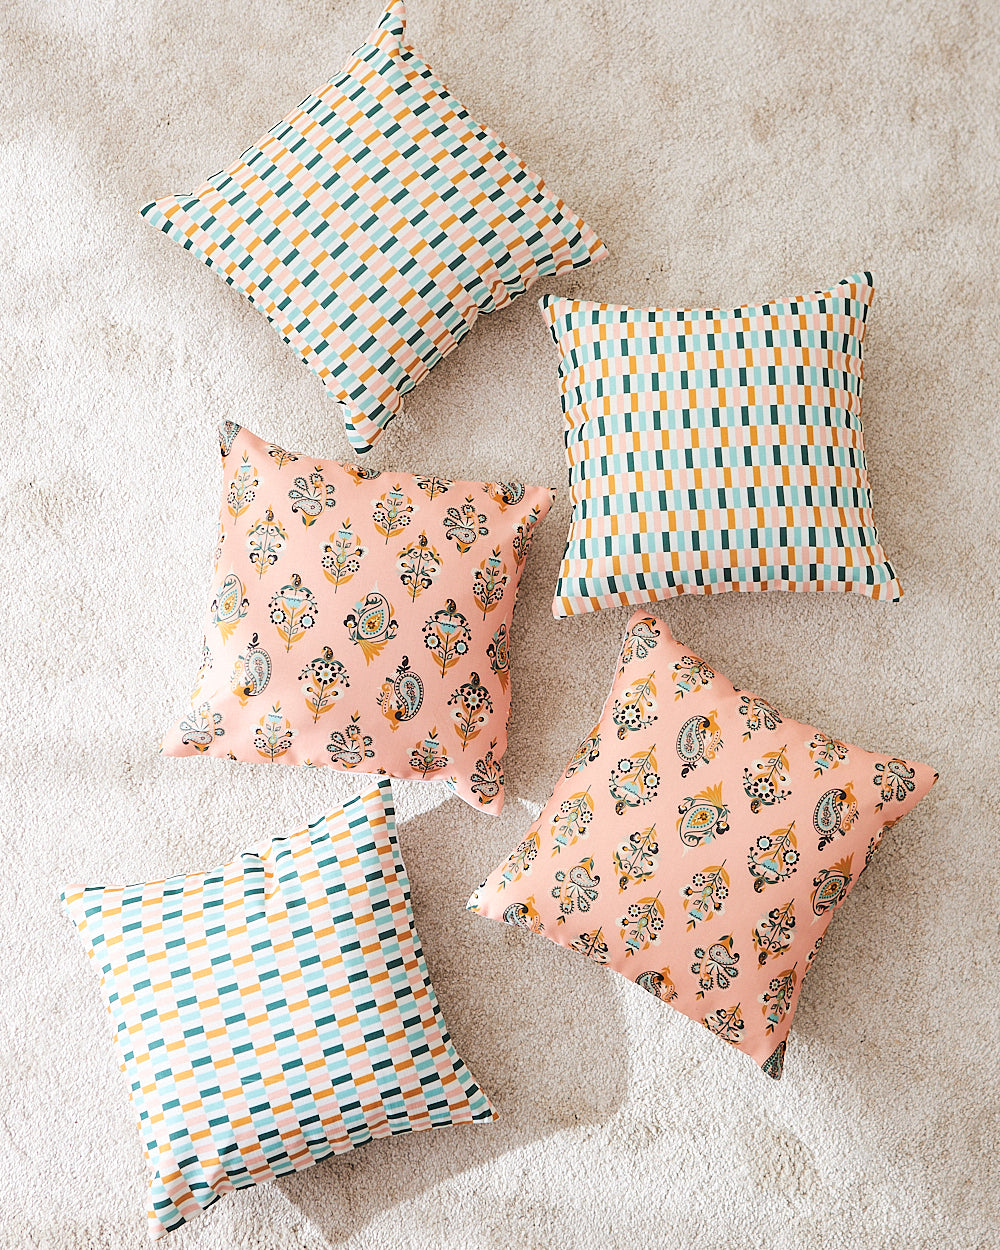 Teal by Chumbak 16" Cushion Covers , Set of 5 Multi color| Zip closure